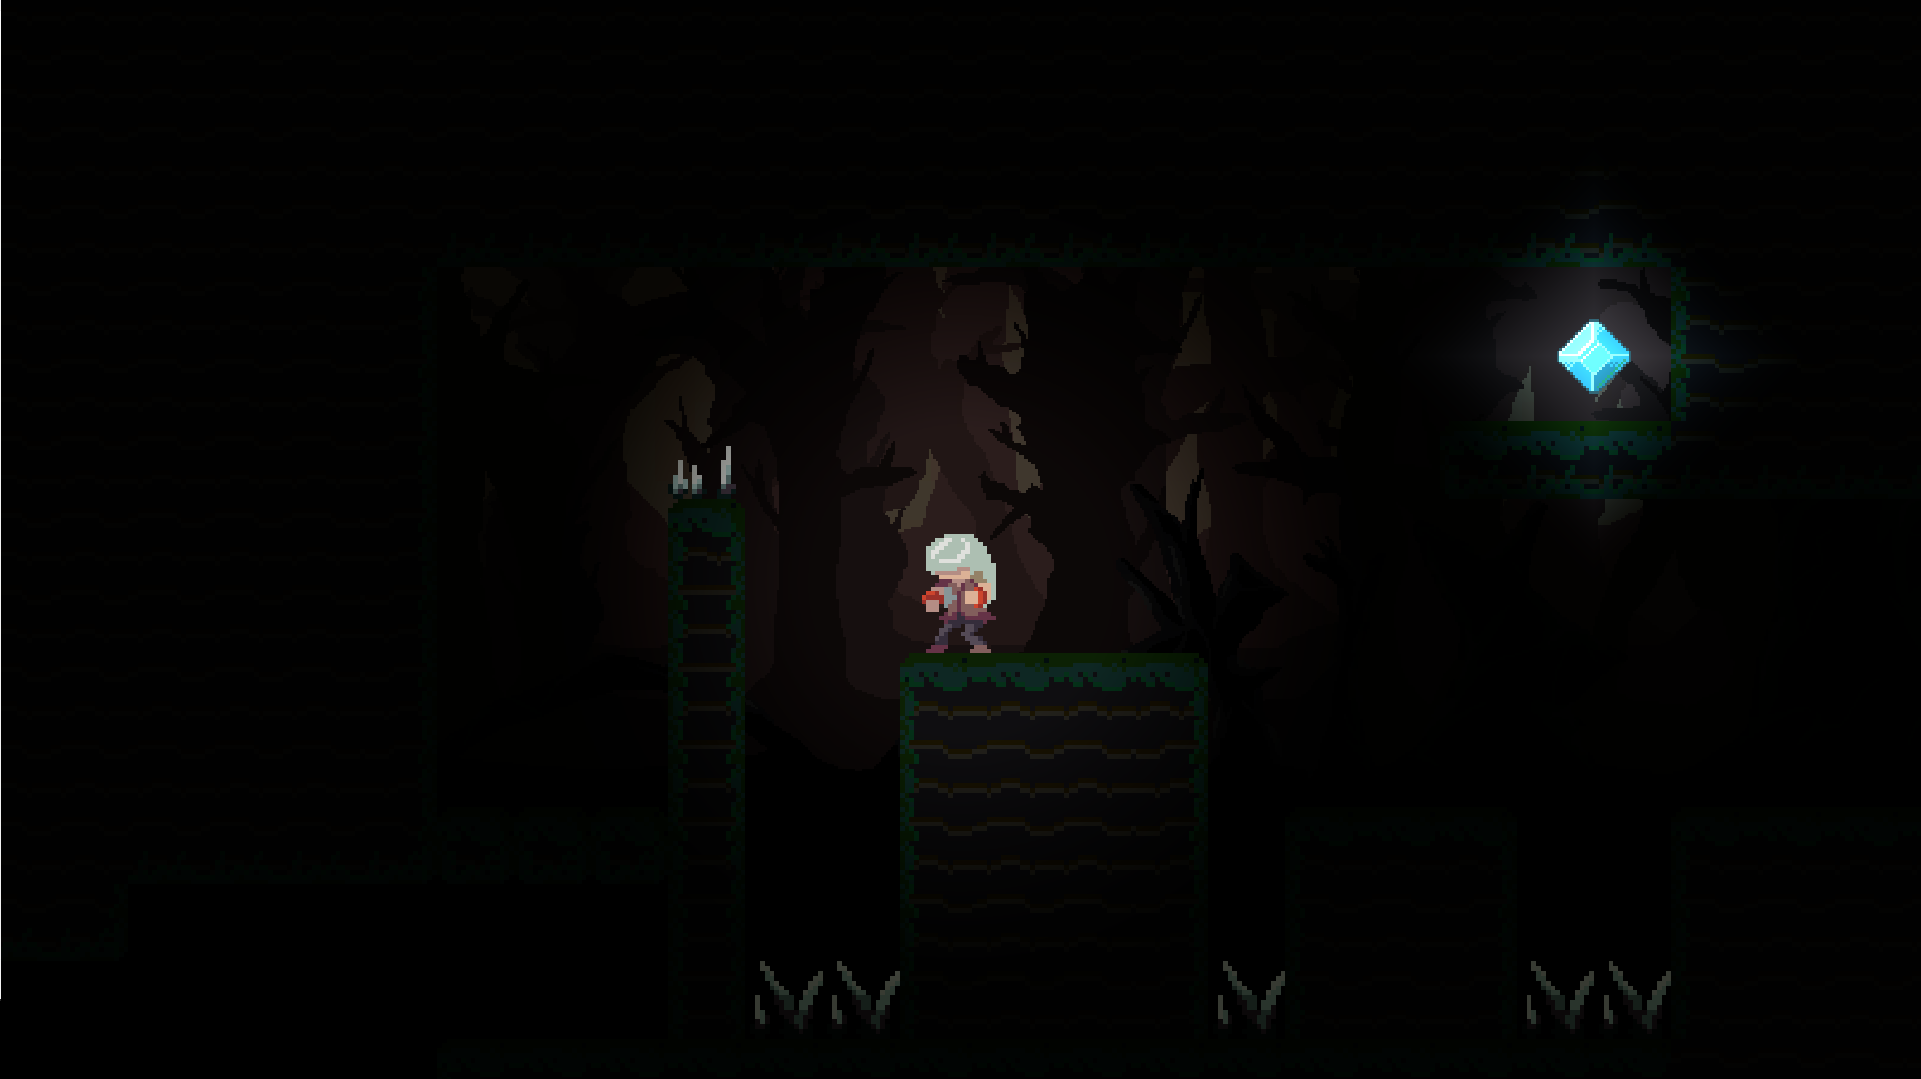 A dark part of the level with no light